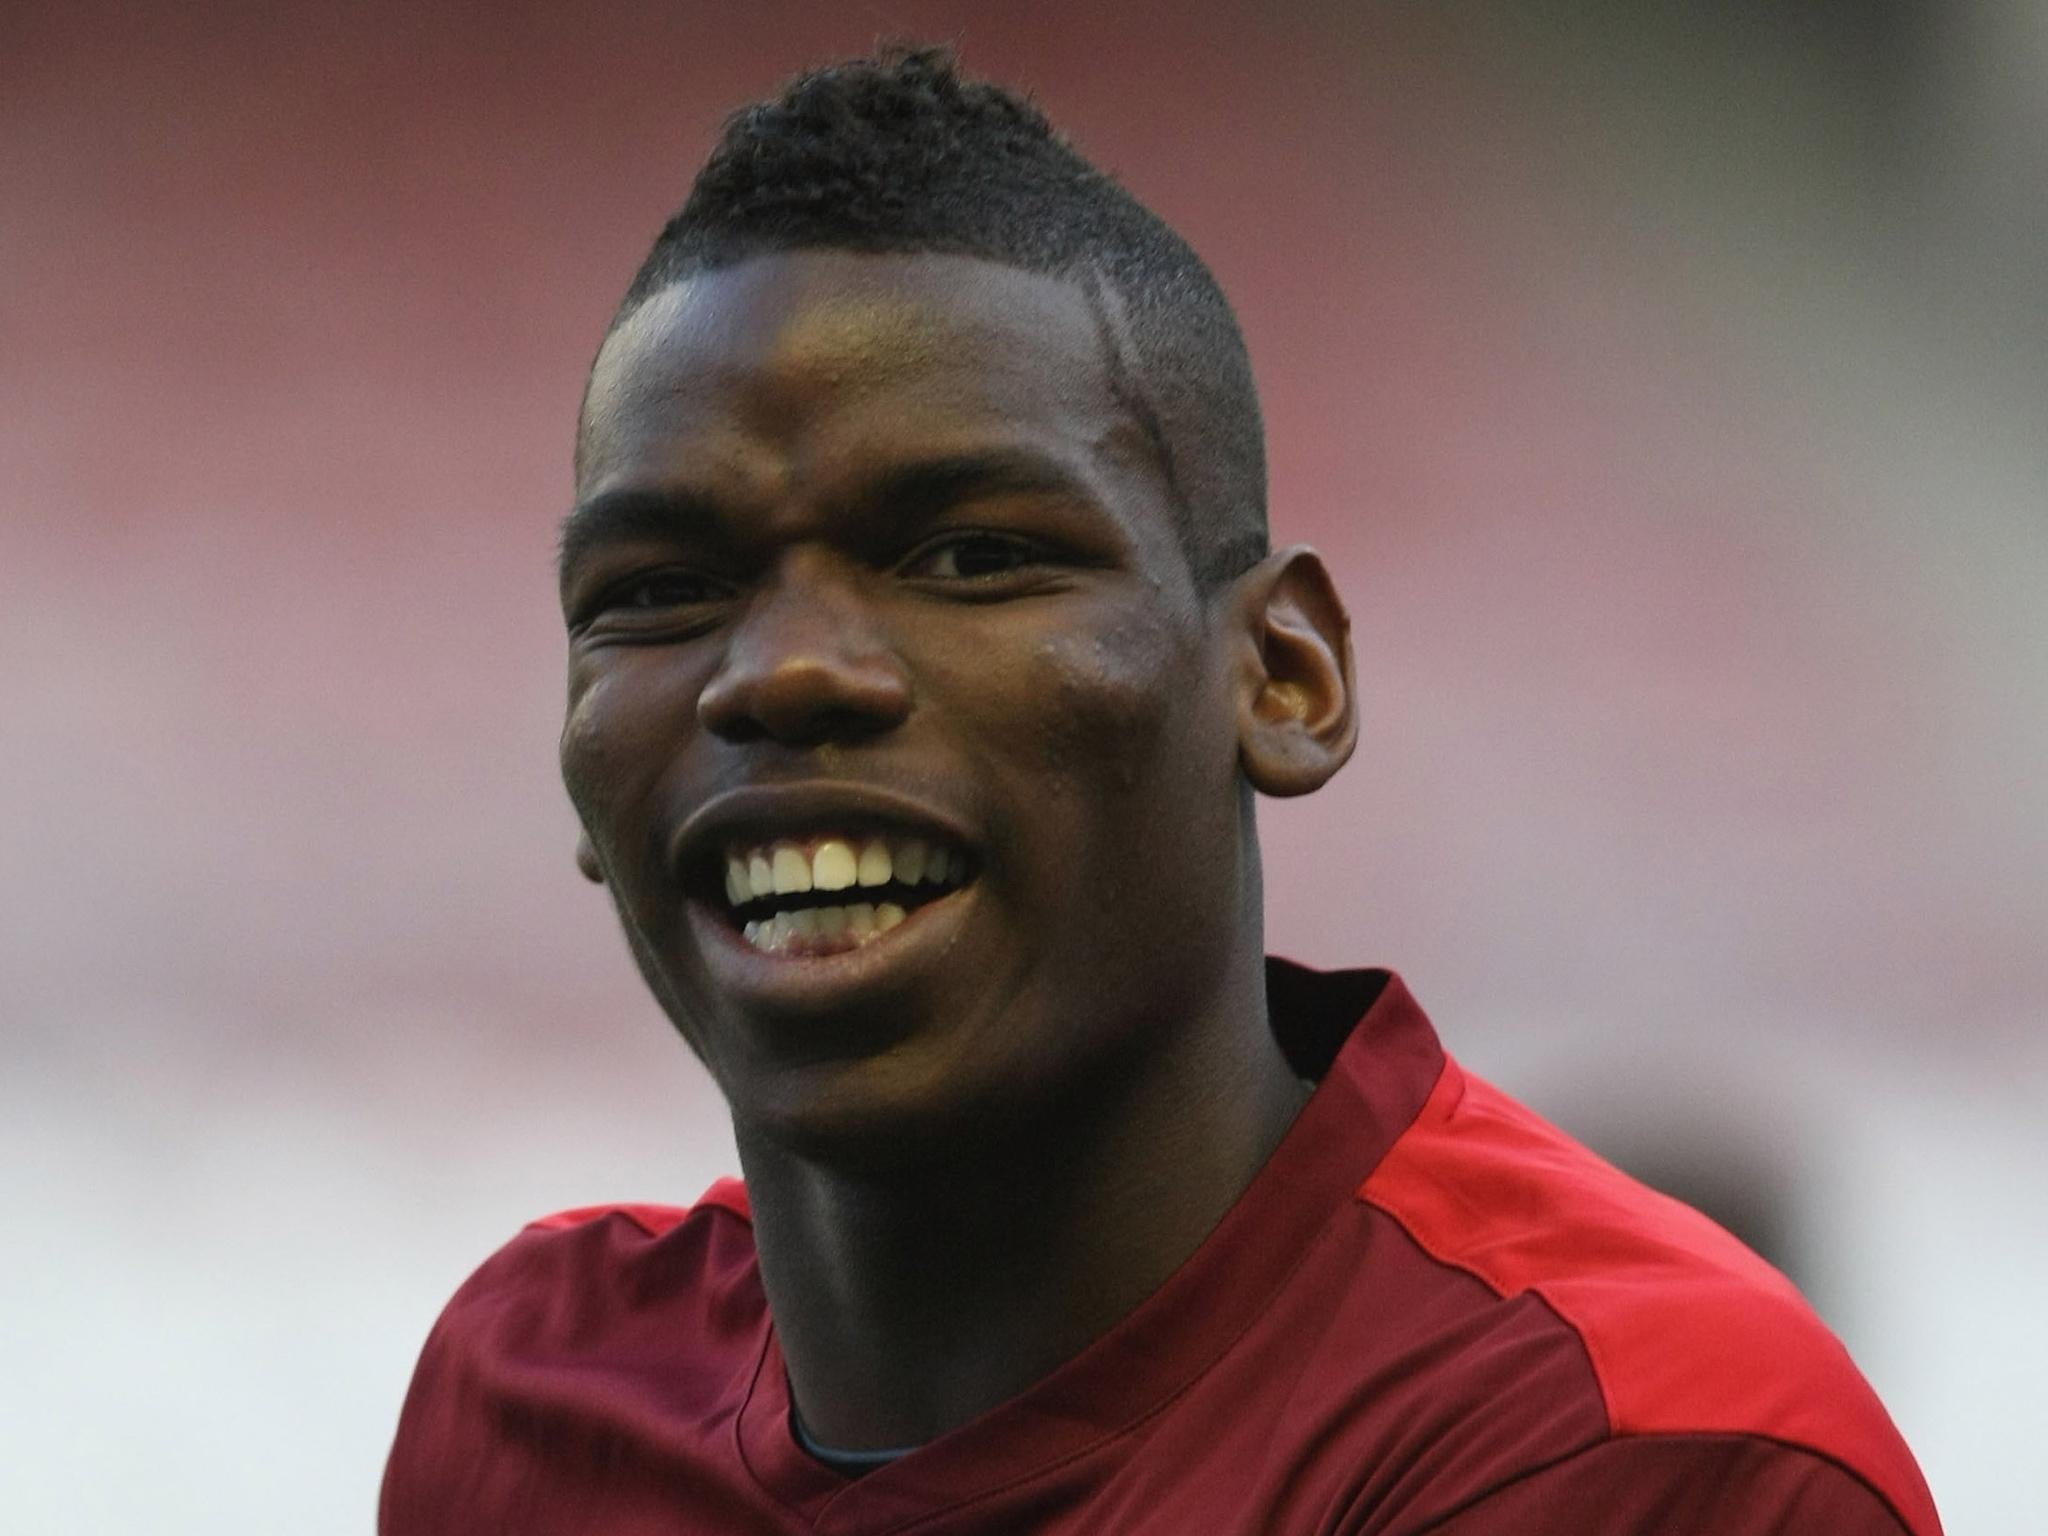 Pogba, pictured during a Manchester United training session in 2012